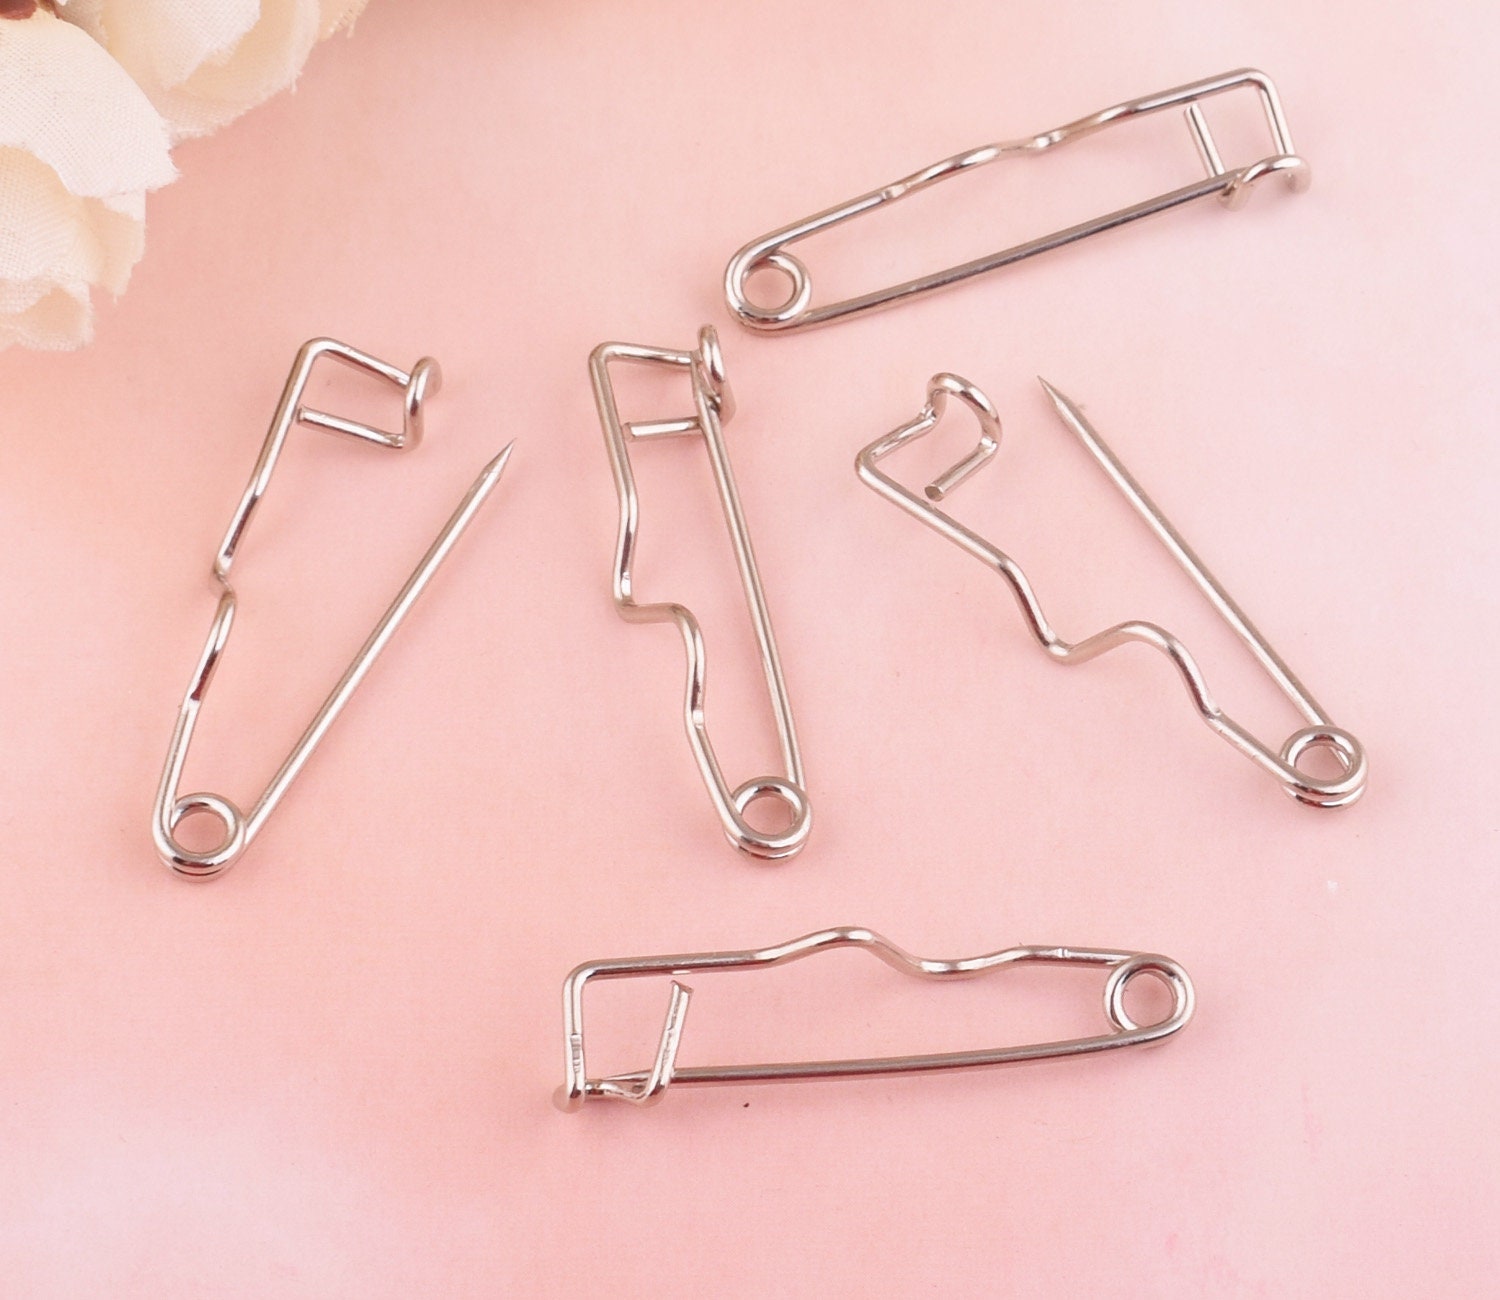 30pcs Small Pin Brooch Silvery Color 196mm Safety Pins Non Flat Pins  Colthing Making 